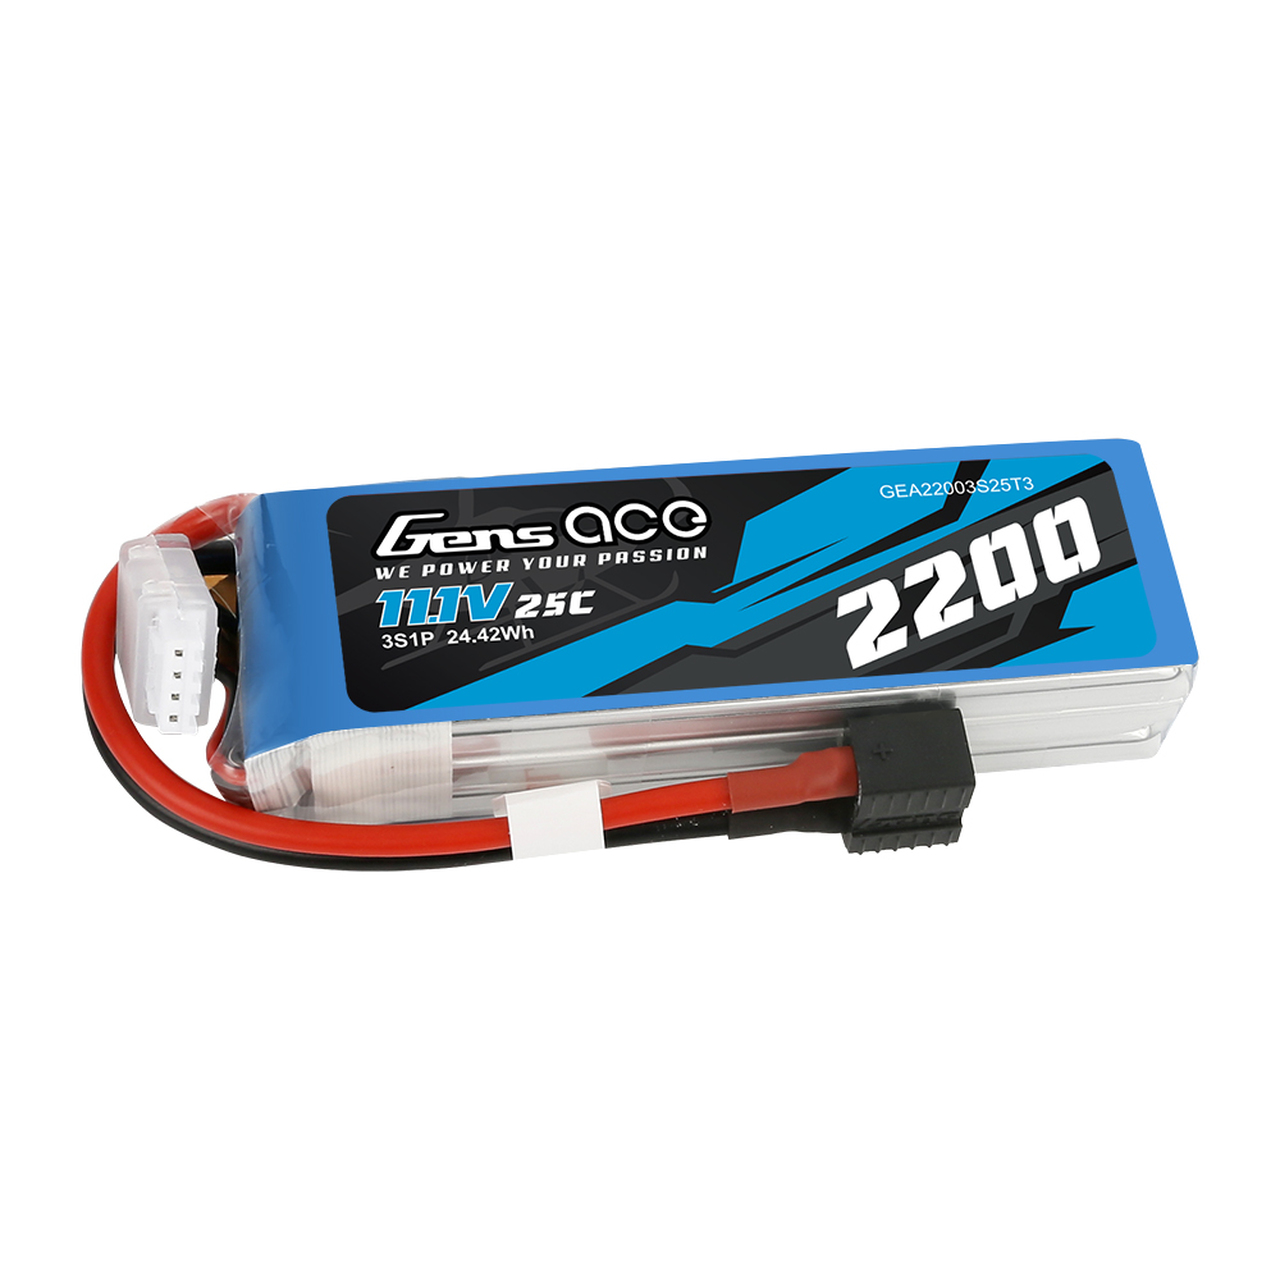 Gens ace 2200mAh 11.1V 3S 11.1V 25C Lipo Battery Pack with 1to3 Plug for RC Plane